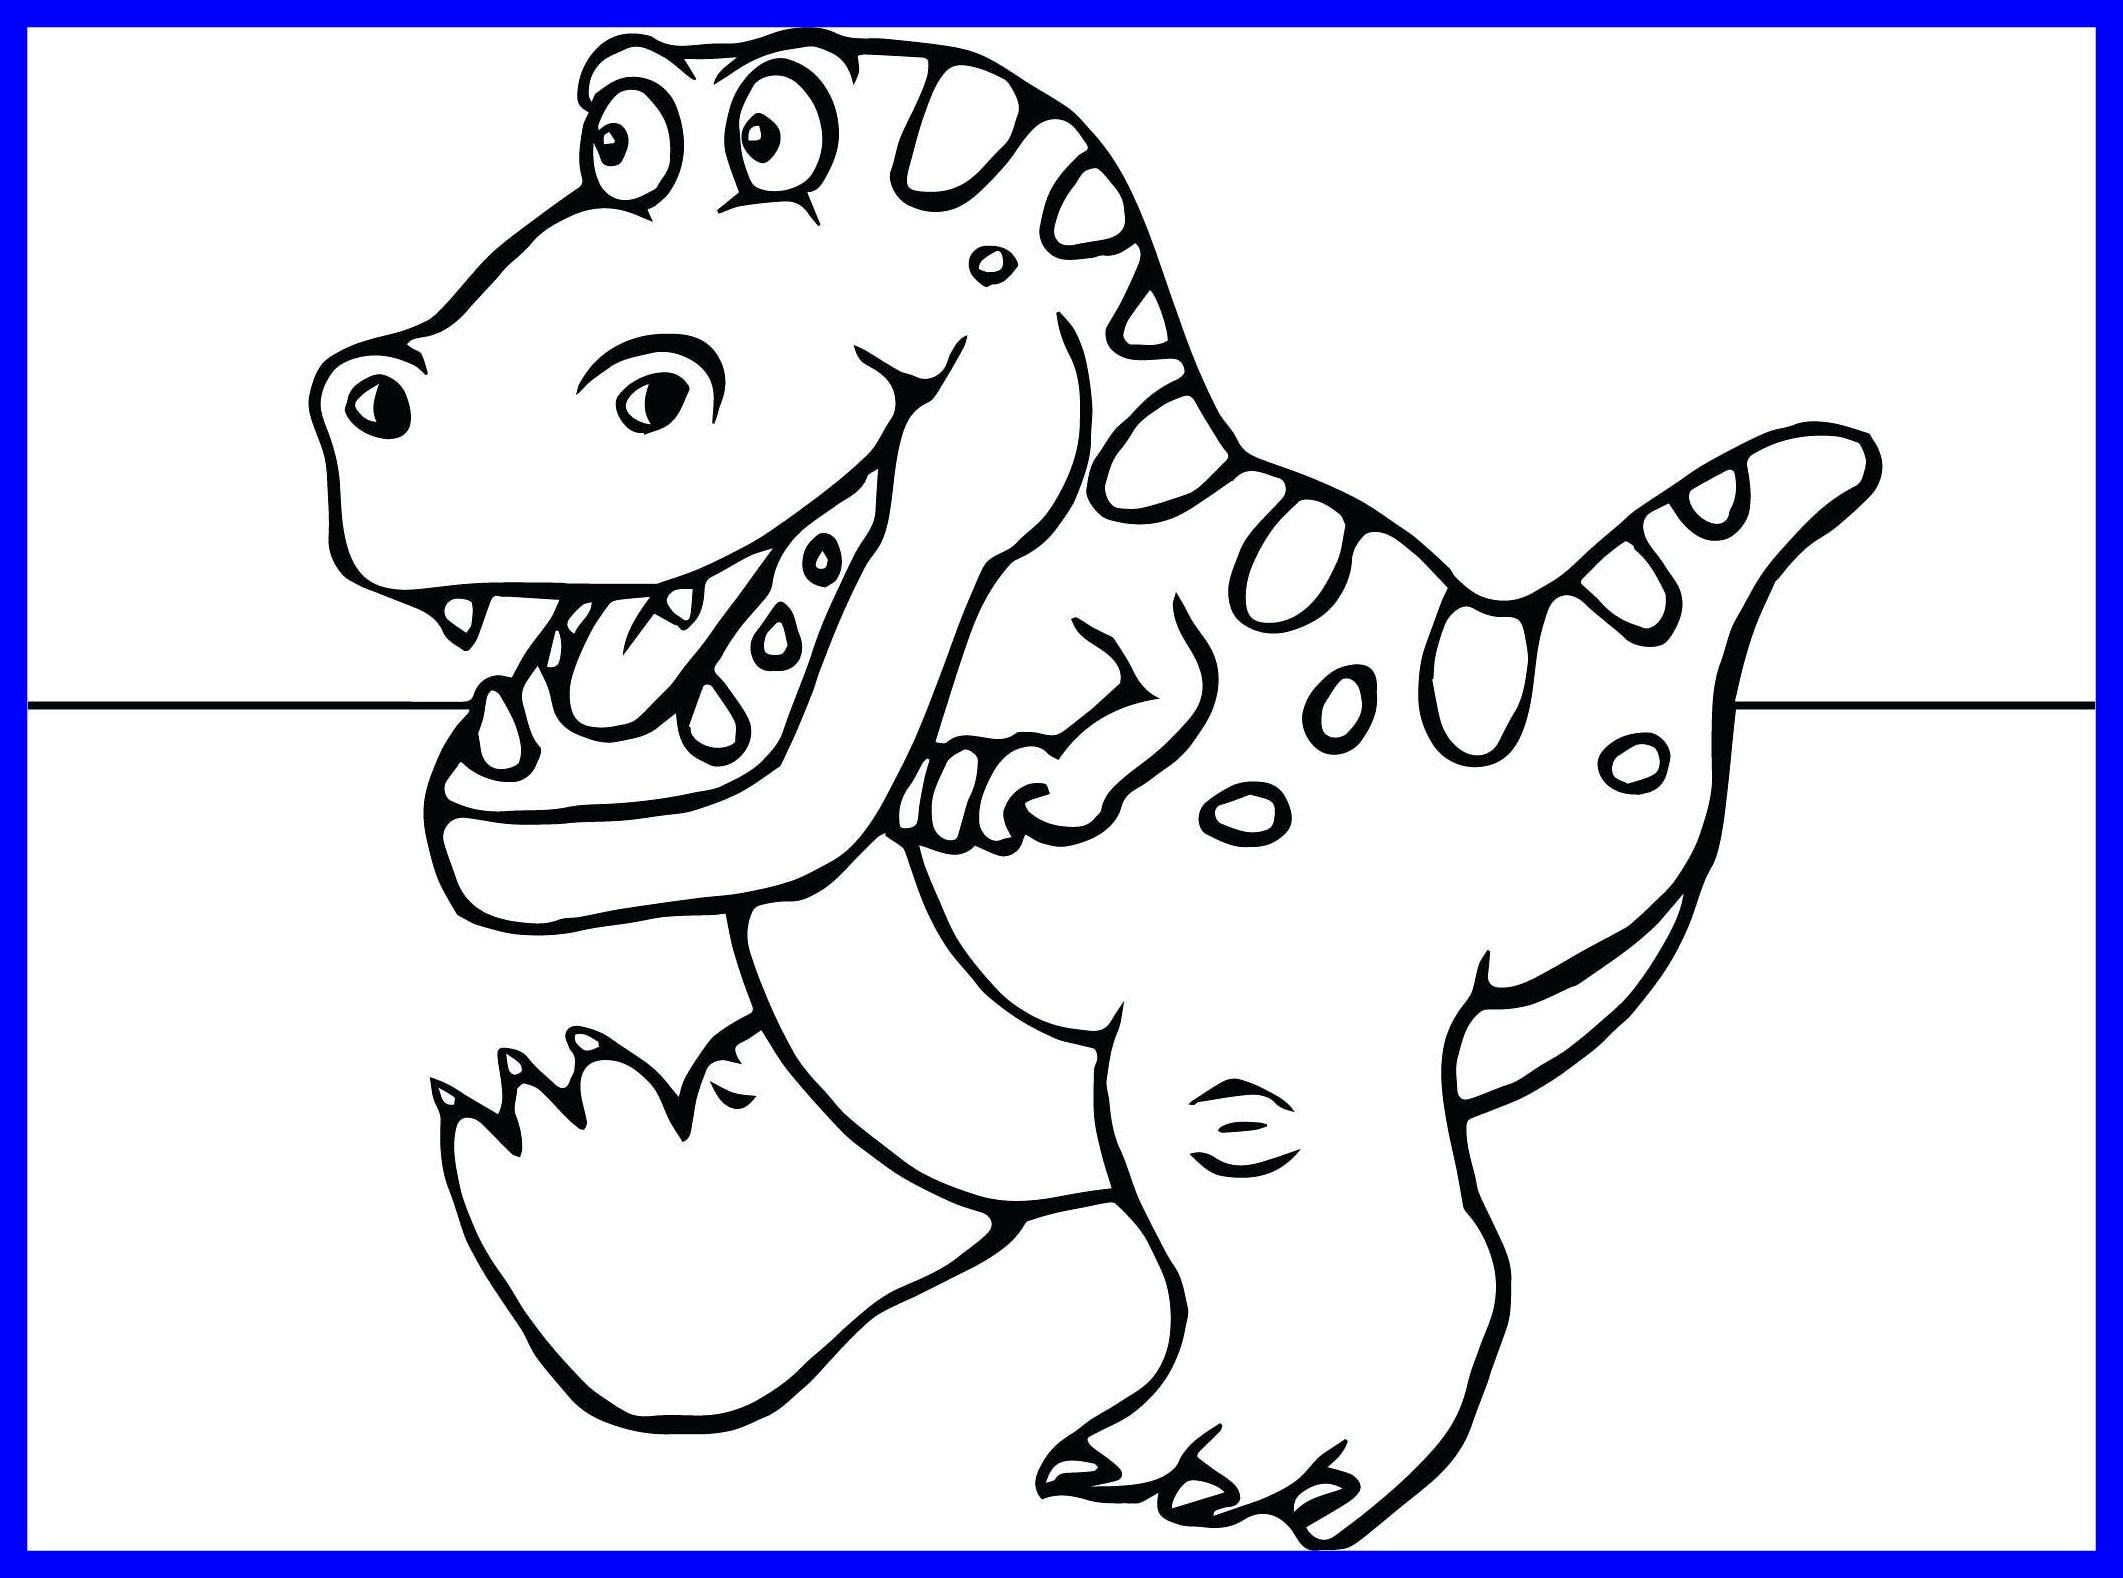 Big Eyed Animal Coloring Pages at GetDrawings | Free download